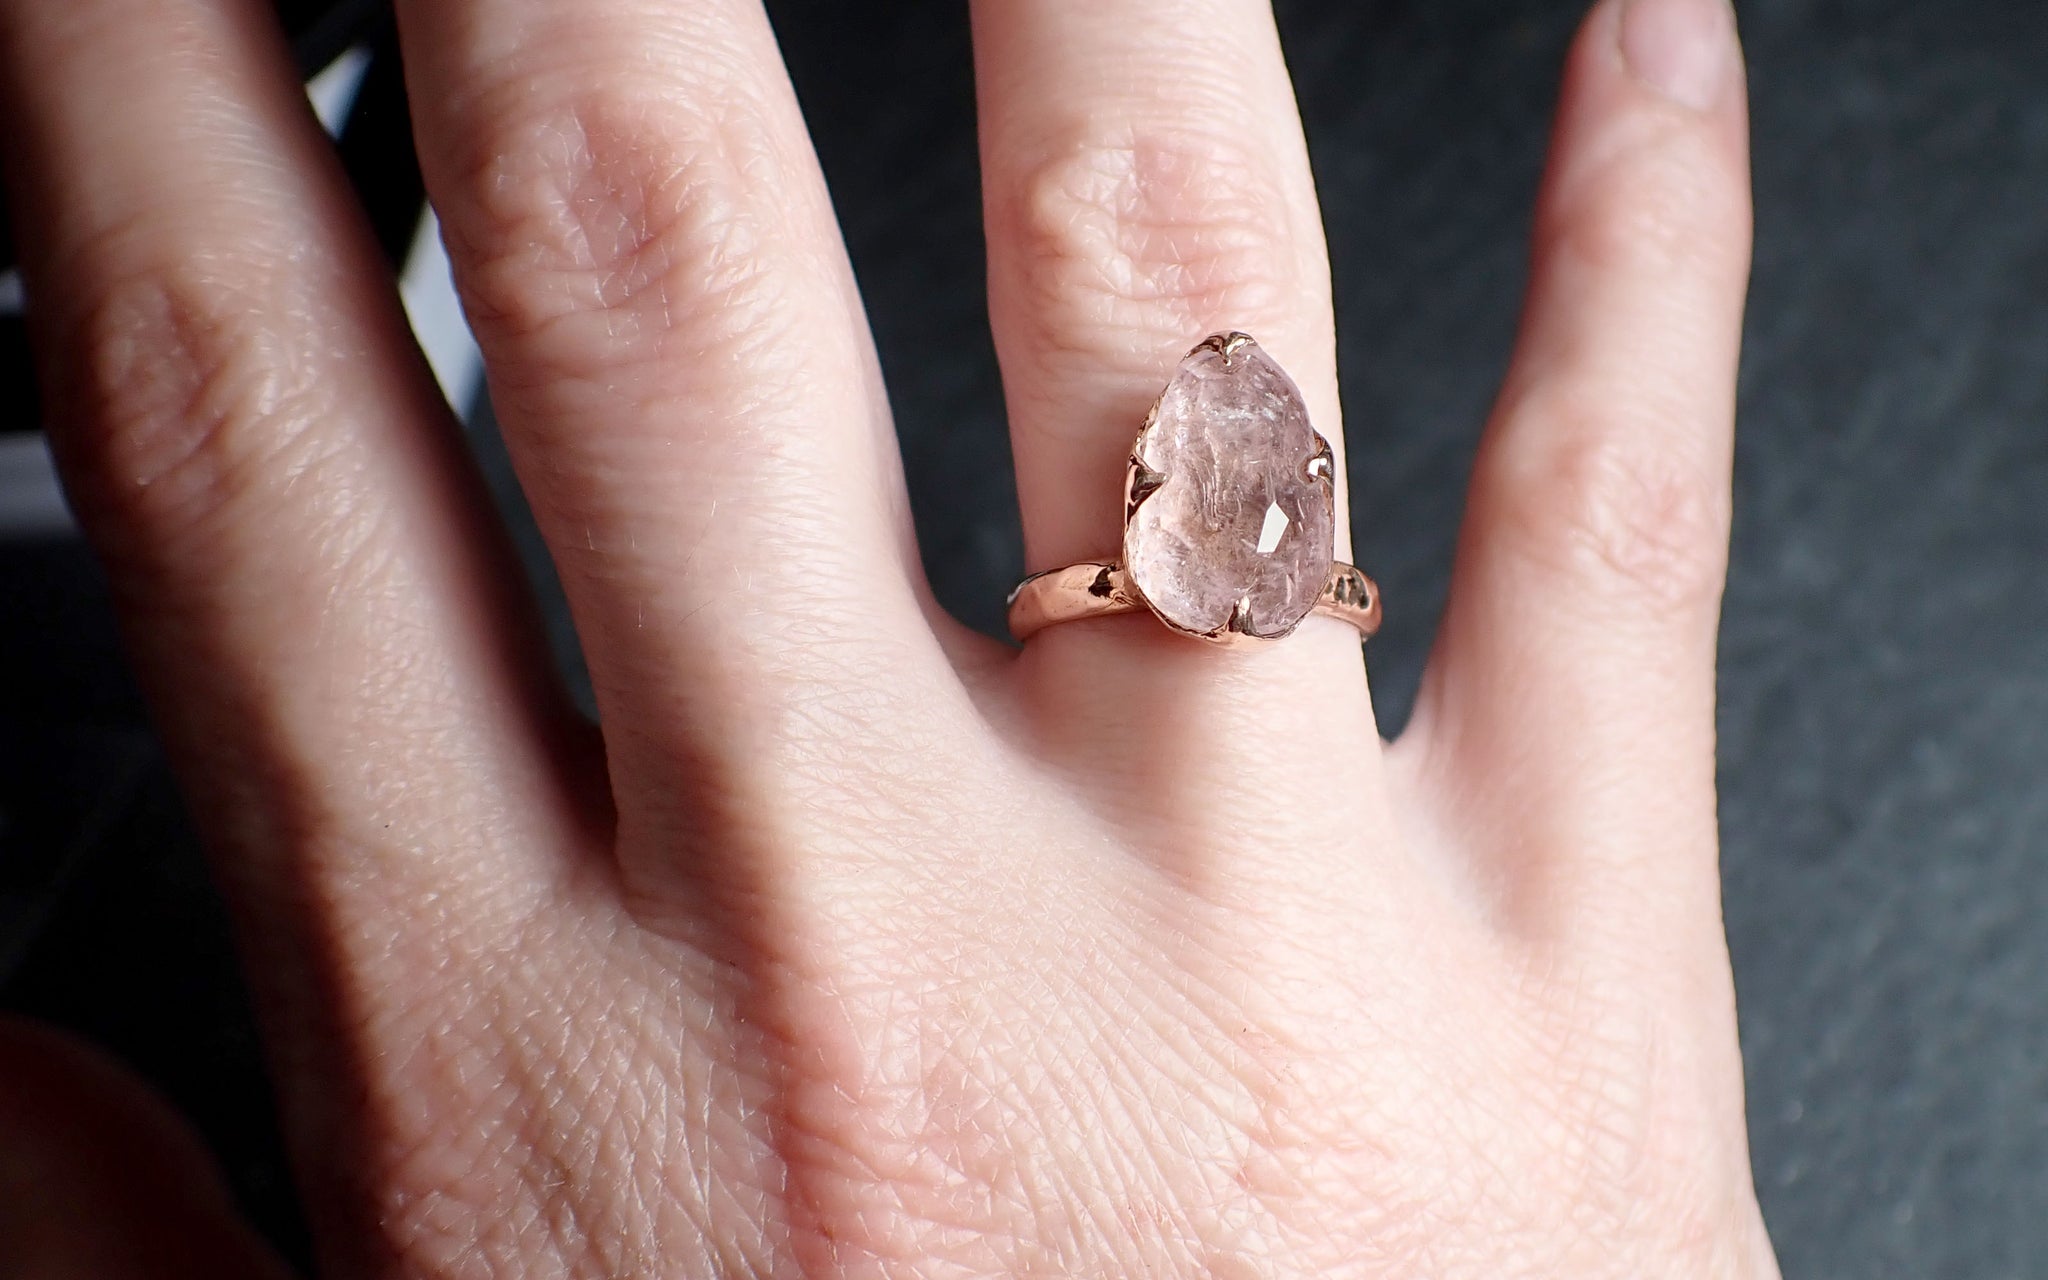 morganite partially faceted 14k rose gold solitaire pink gemstone ring statement ring gemstone jewelry by angeline 2493 Alternative Engagement